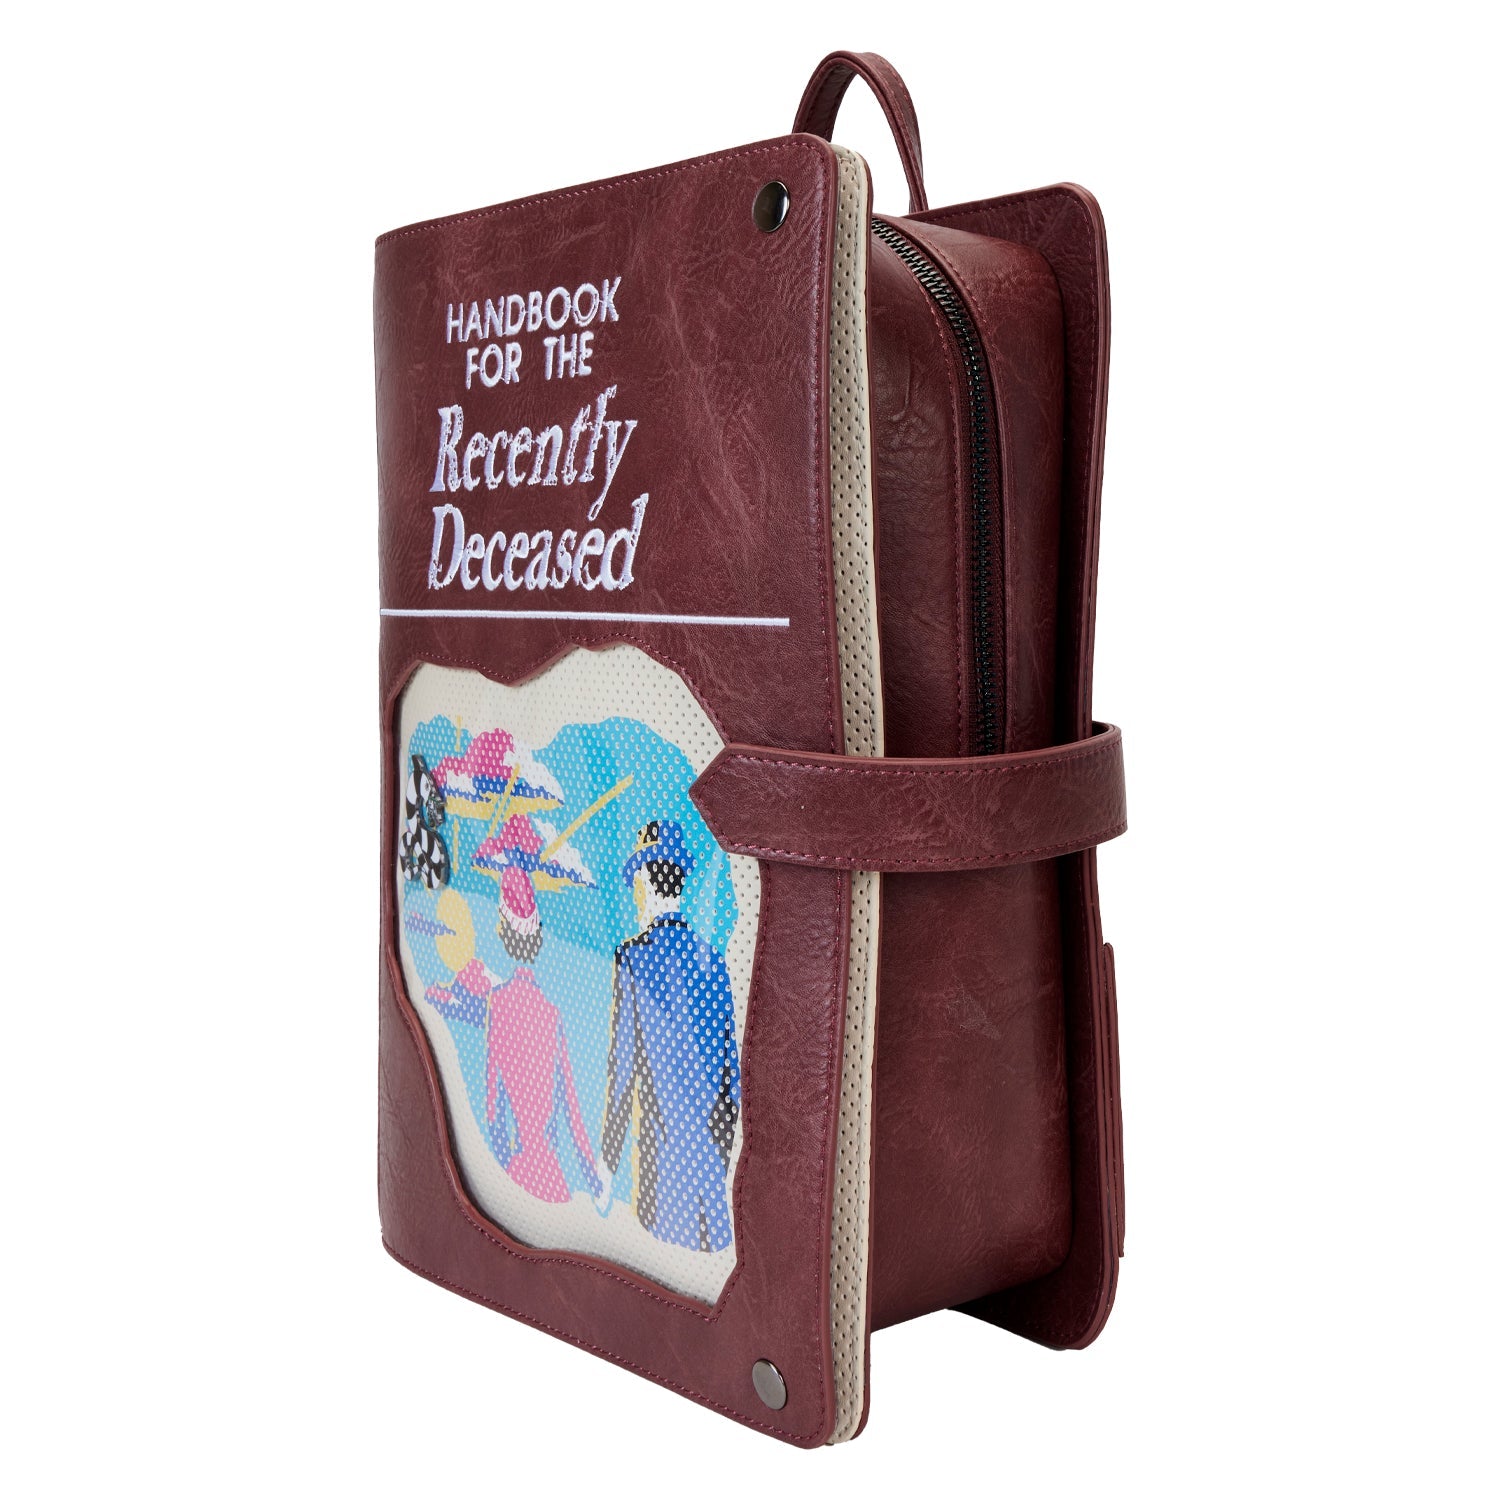 Loungefly x Beetlejuice Handbook For The Recently Deceased Pin Trader Backpack - GeekCore